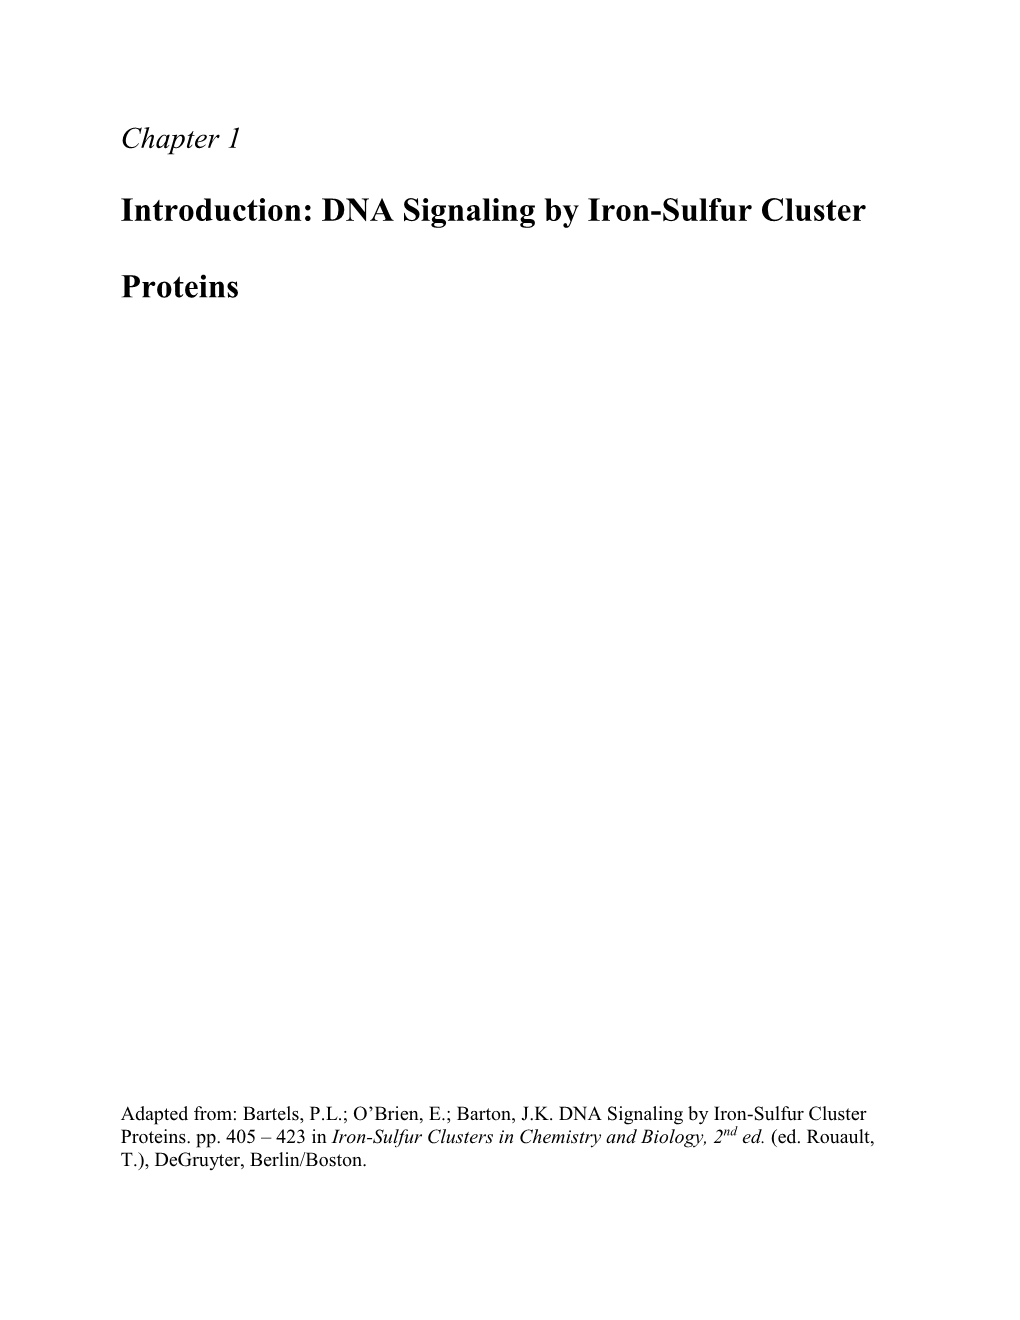 Introduction: DNA Signaling by Iron-Sulfur Cluster Proteins